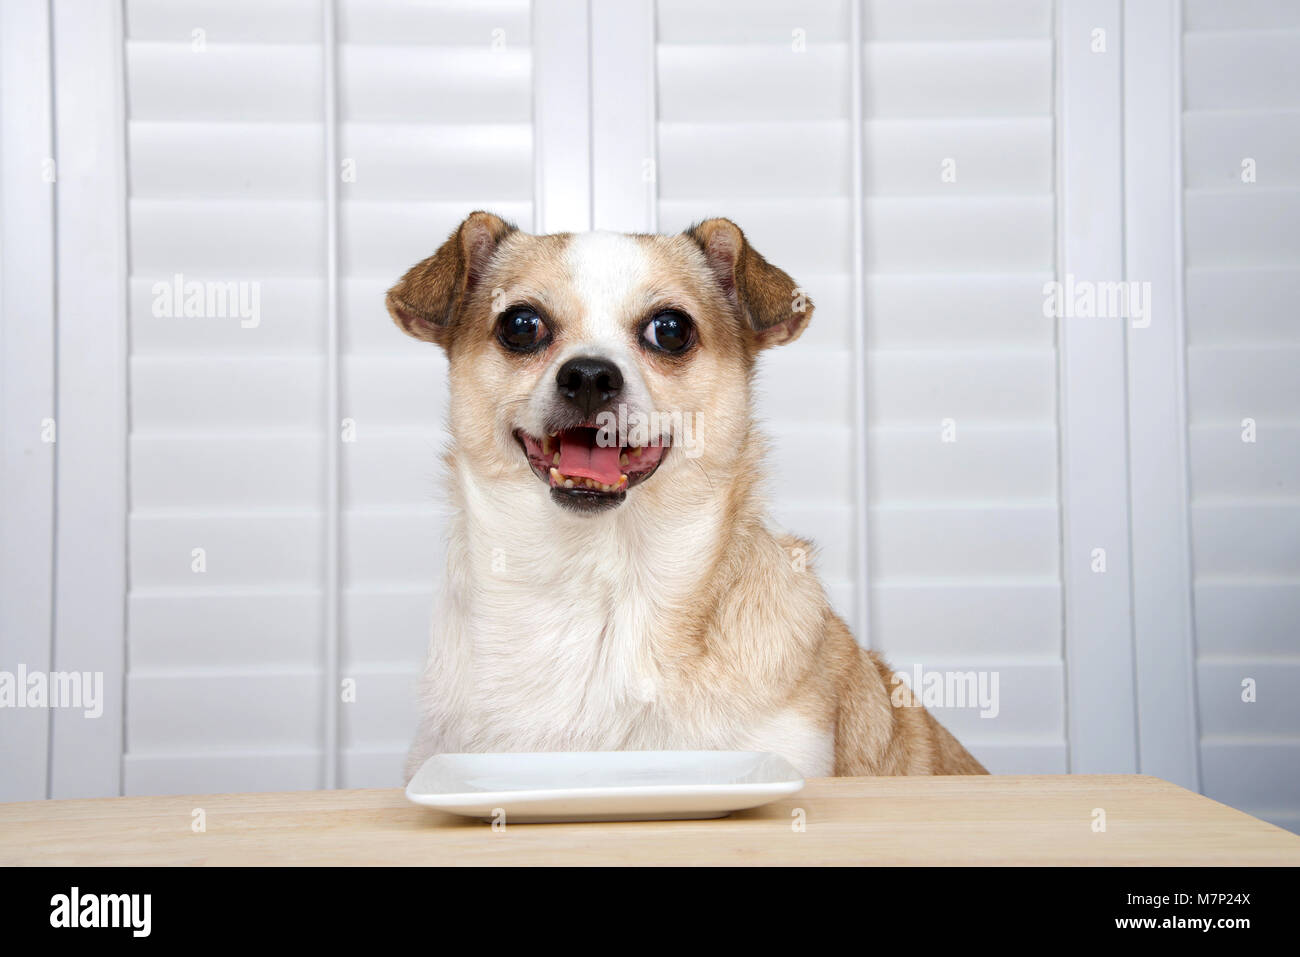 One senior chihuahua dog sitting at kitchen table waiting for food. Square white plate empty. Window background with shutters. Mouth open Stock Photo